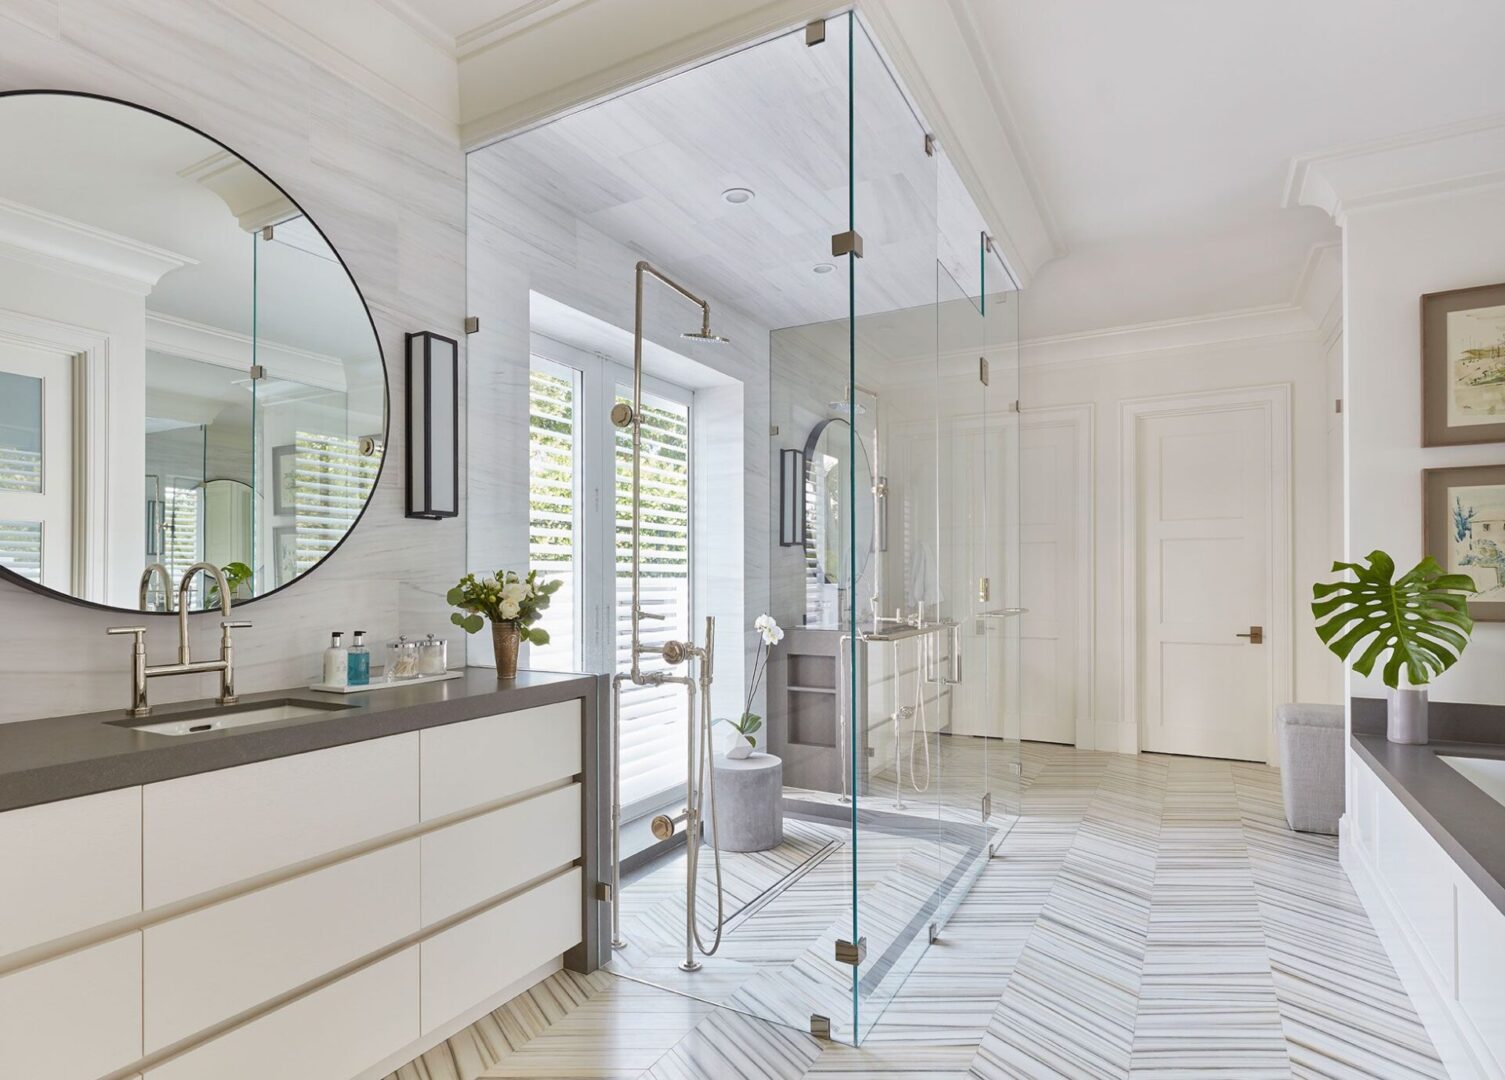 A bathroom with white walls and floors, and a large mirror.